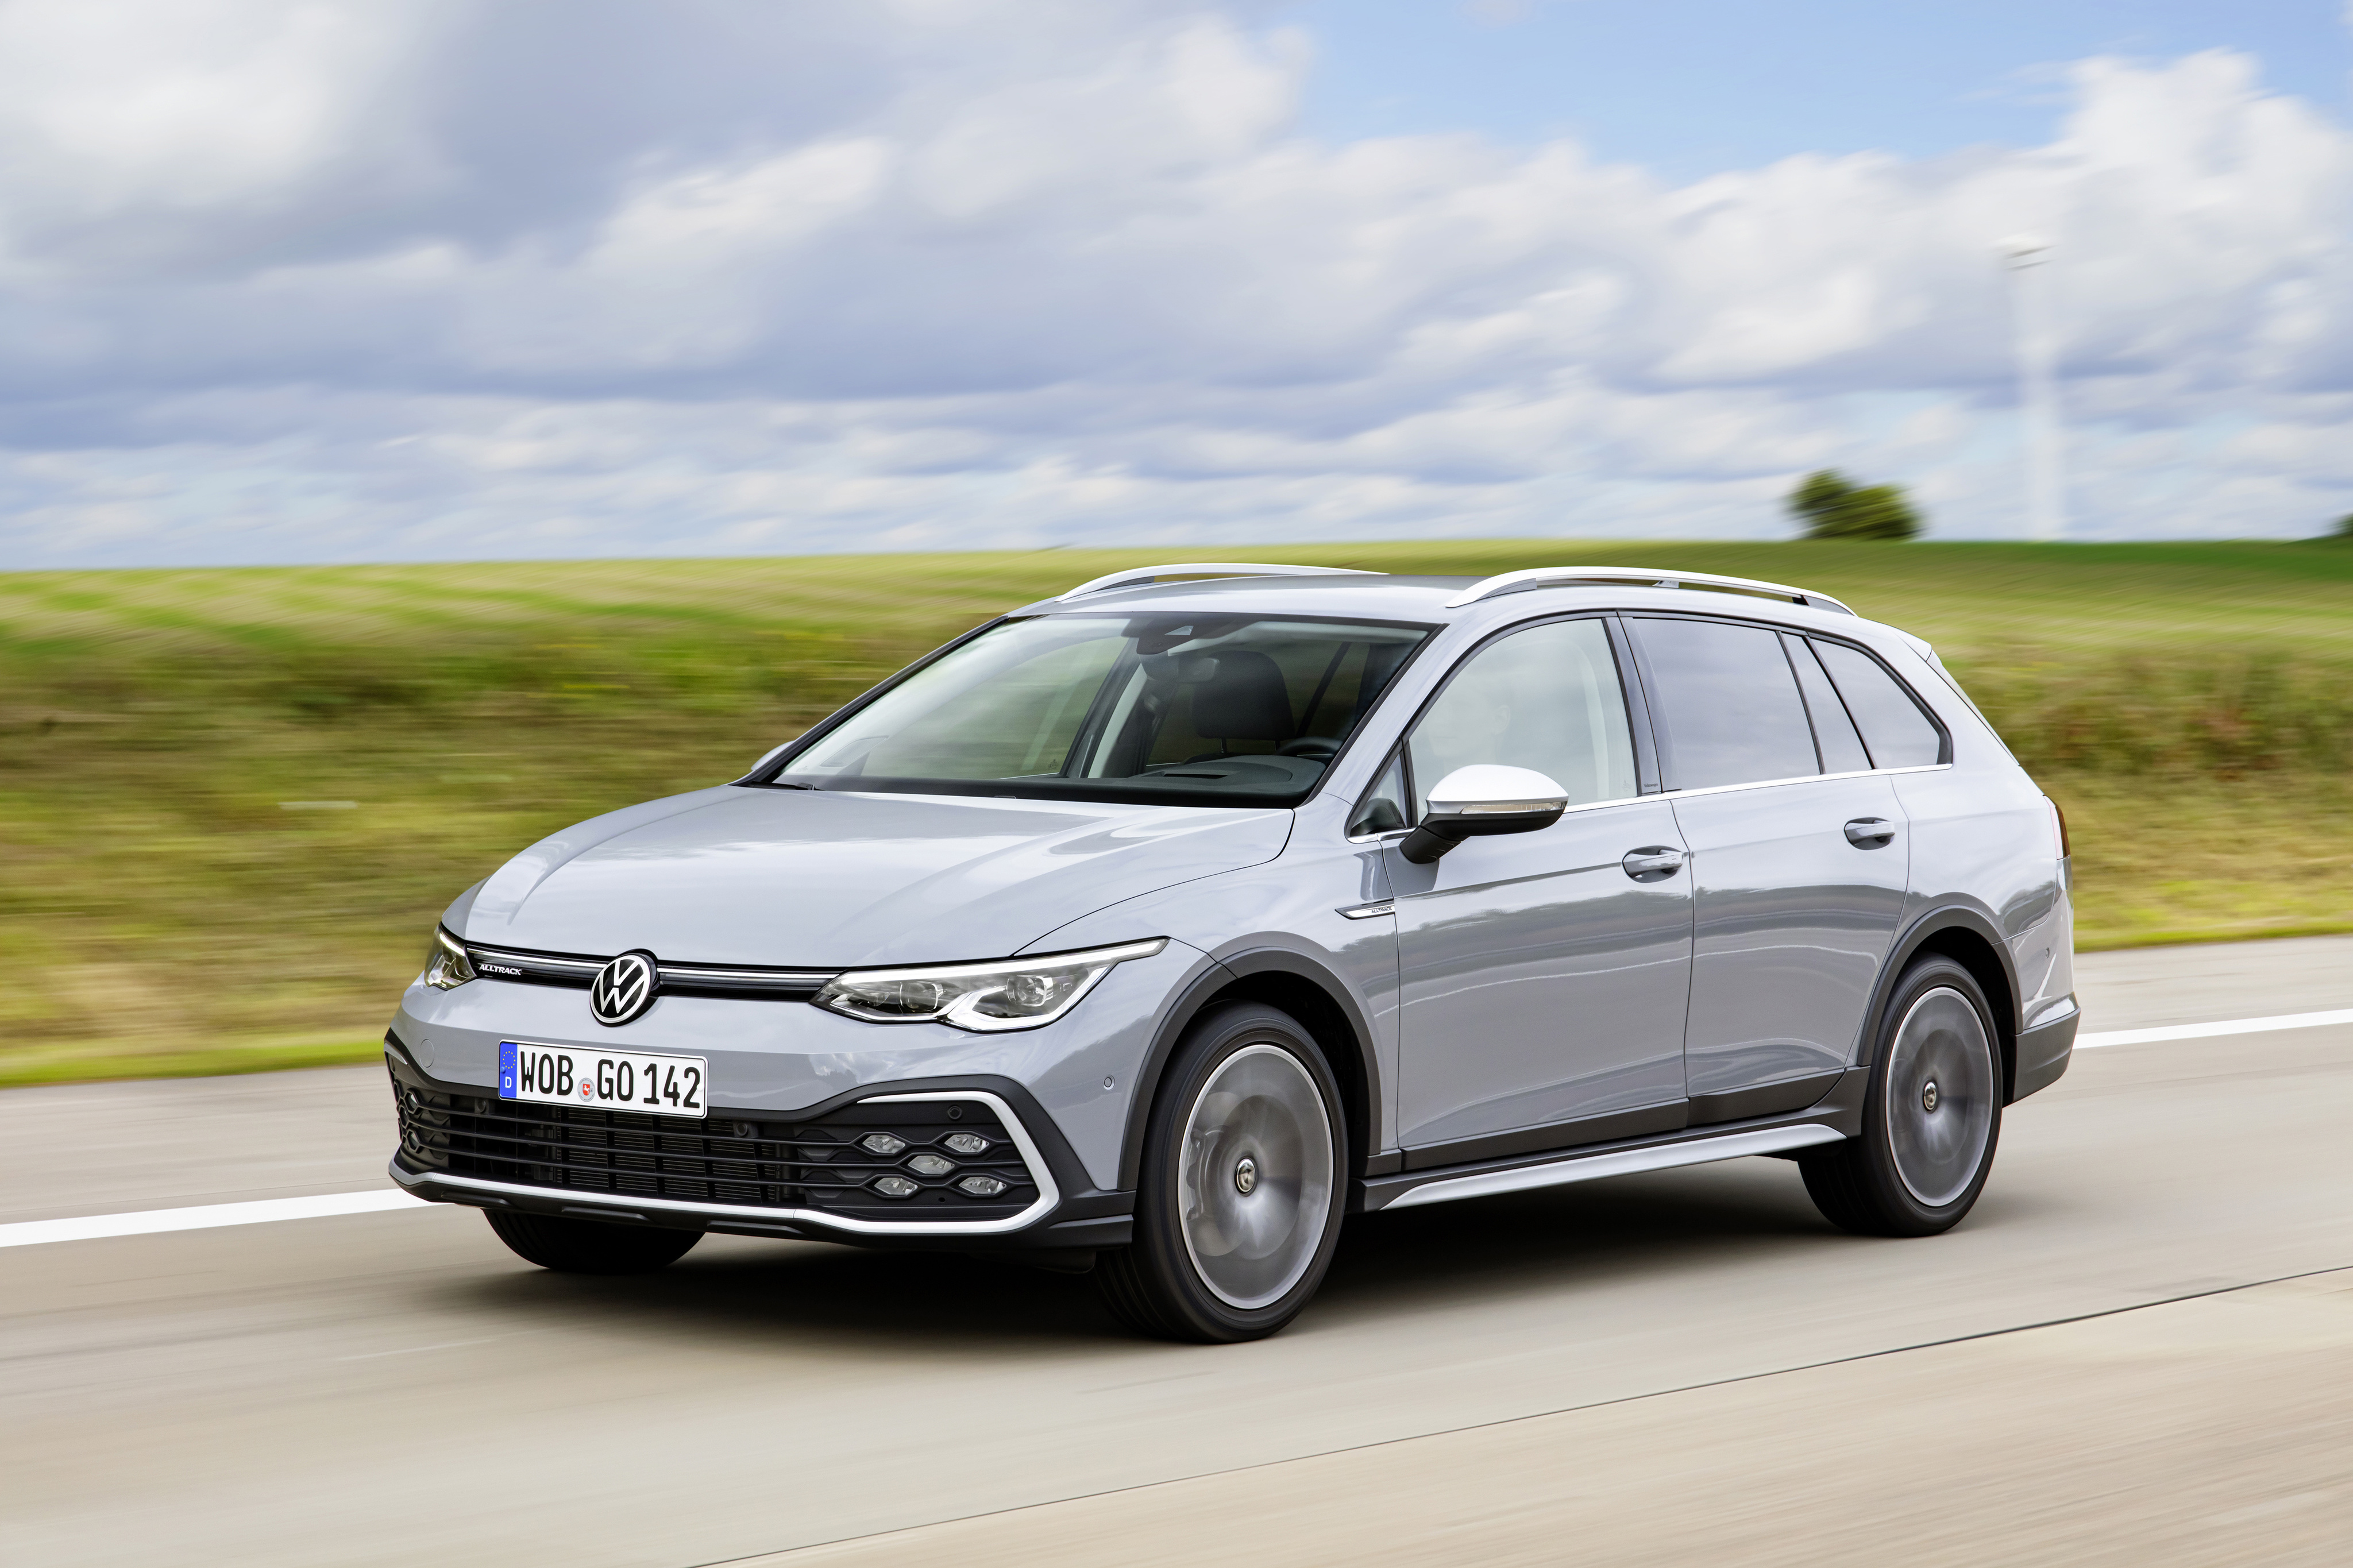 New Volkswagen Golf Estate hits the road priced from £24,575